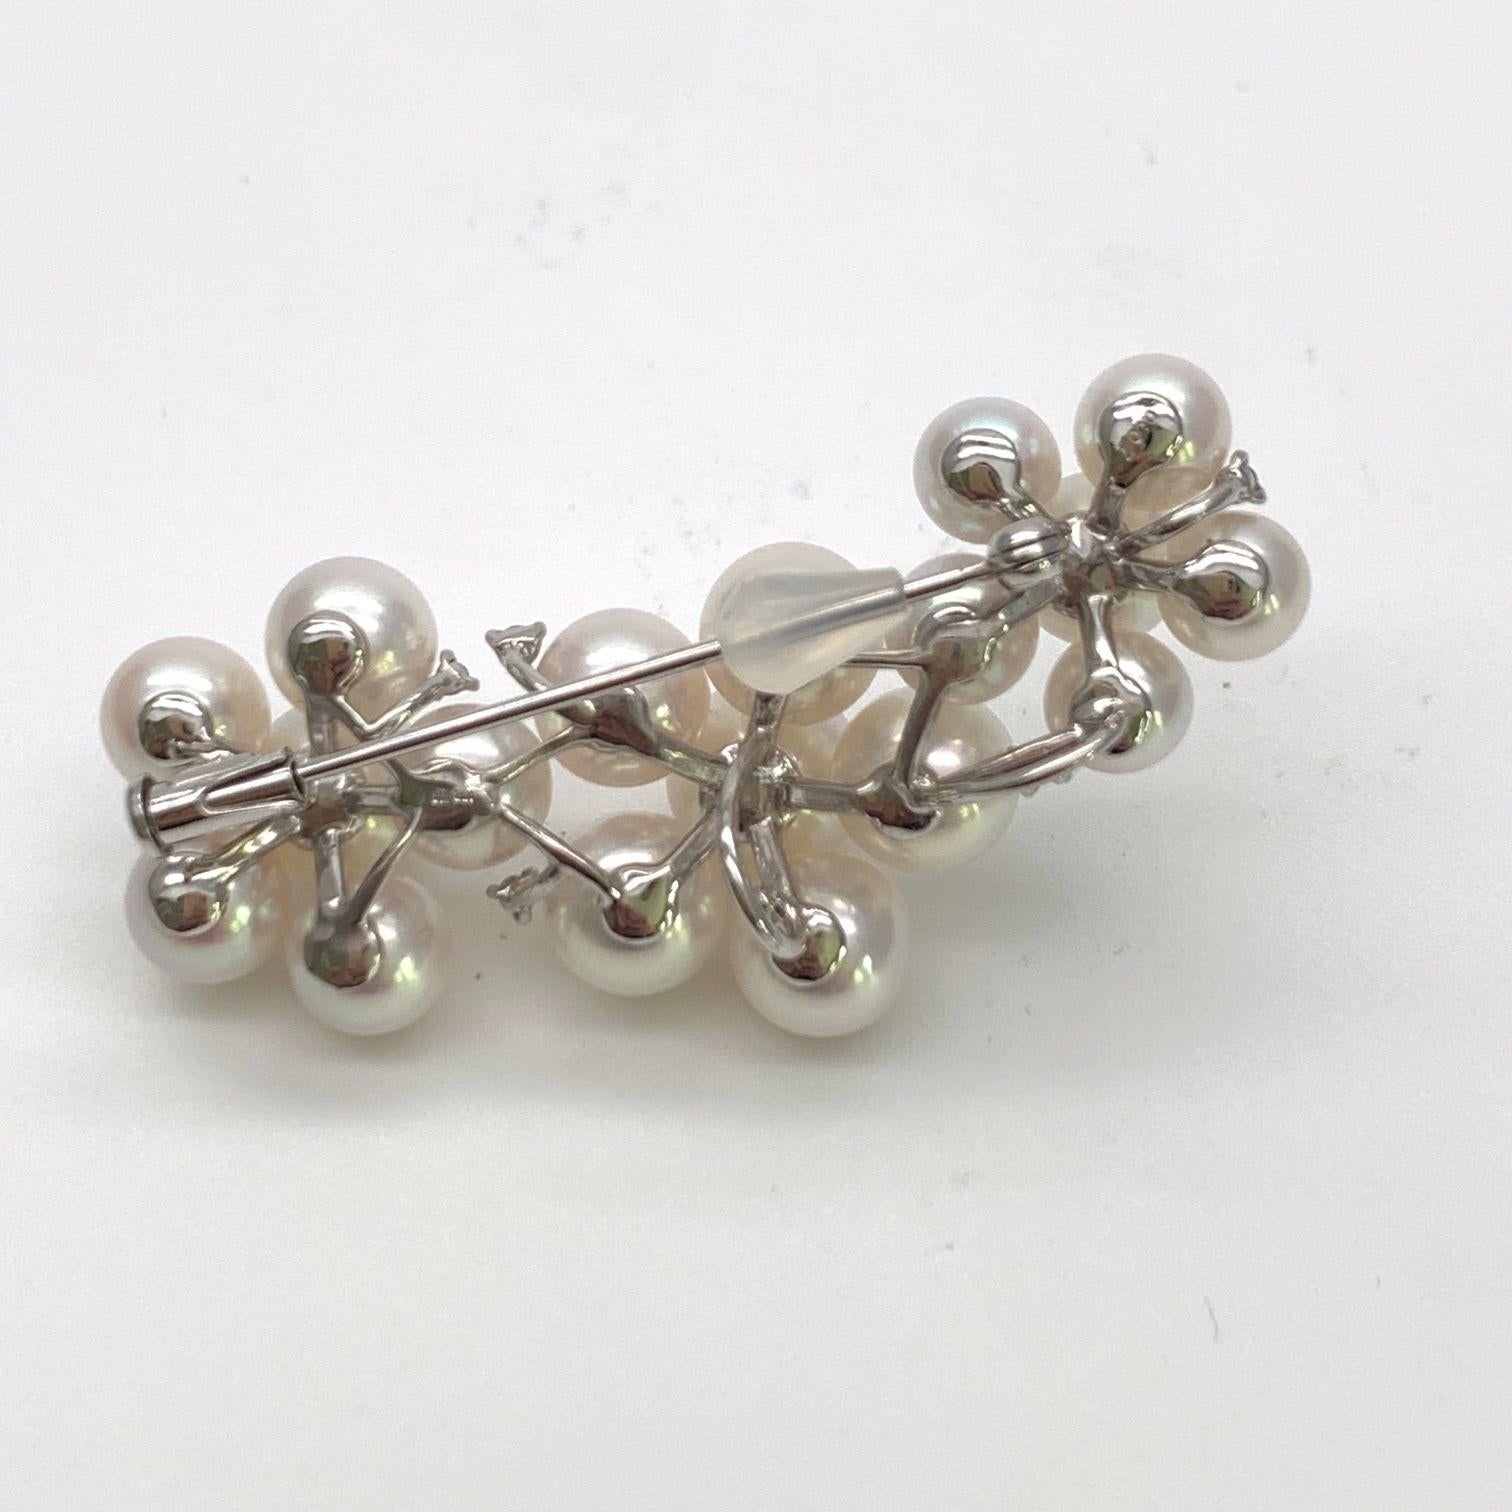 18 White Akoya Pearls Draped Together with an 18K White Gold and Diamond Brooch Pin. A Versatile Design that Can Be Worn in Many Ways. Fashionable and Stylish. Perfect for any Occasion.

Akoya Pearls from Ise Shima Japan are 100% sustainably